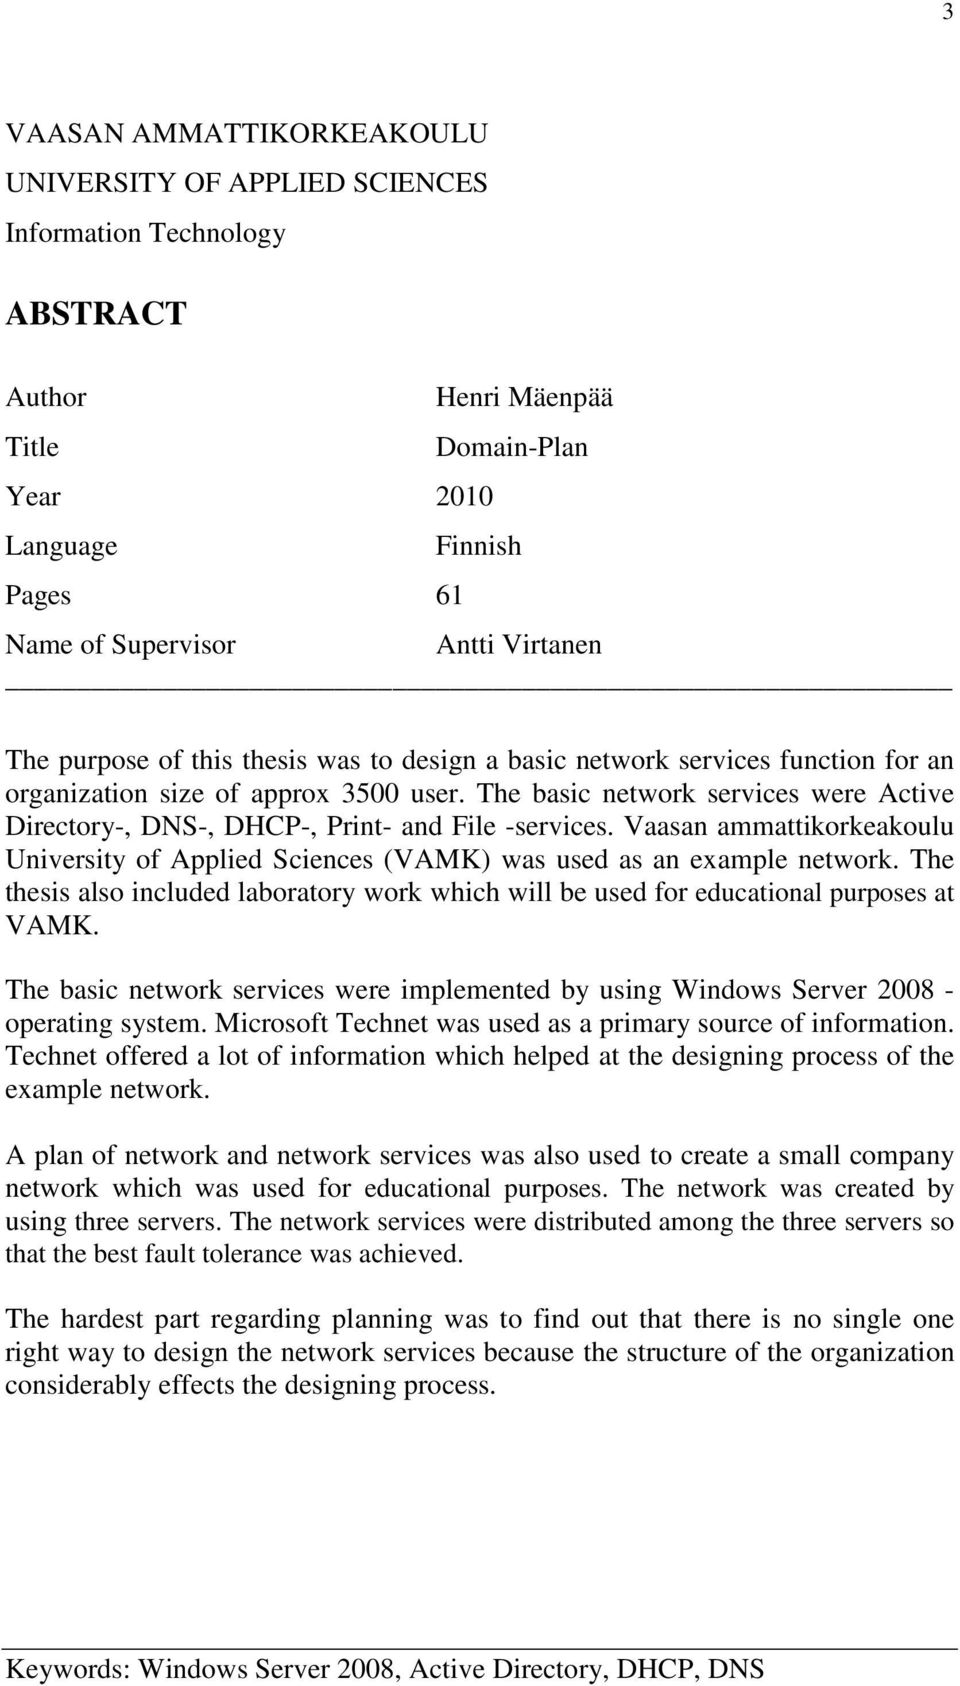 The basic network services were Active Directory-, DNS-, DHCP-, Print- and File -services. Vaasan ammattikorkeakoulu University of Applied Sciences (VAMK) was used as an example network.